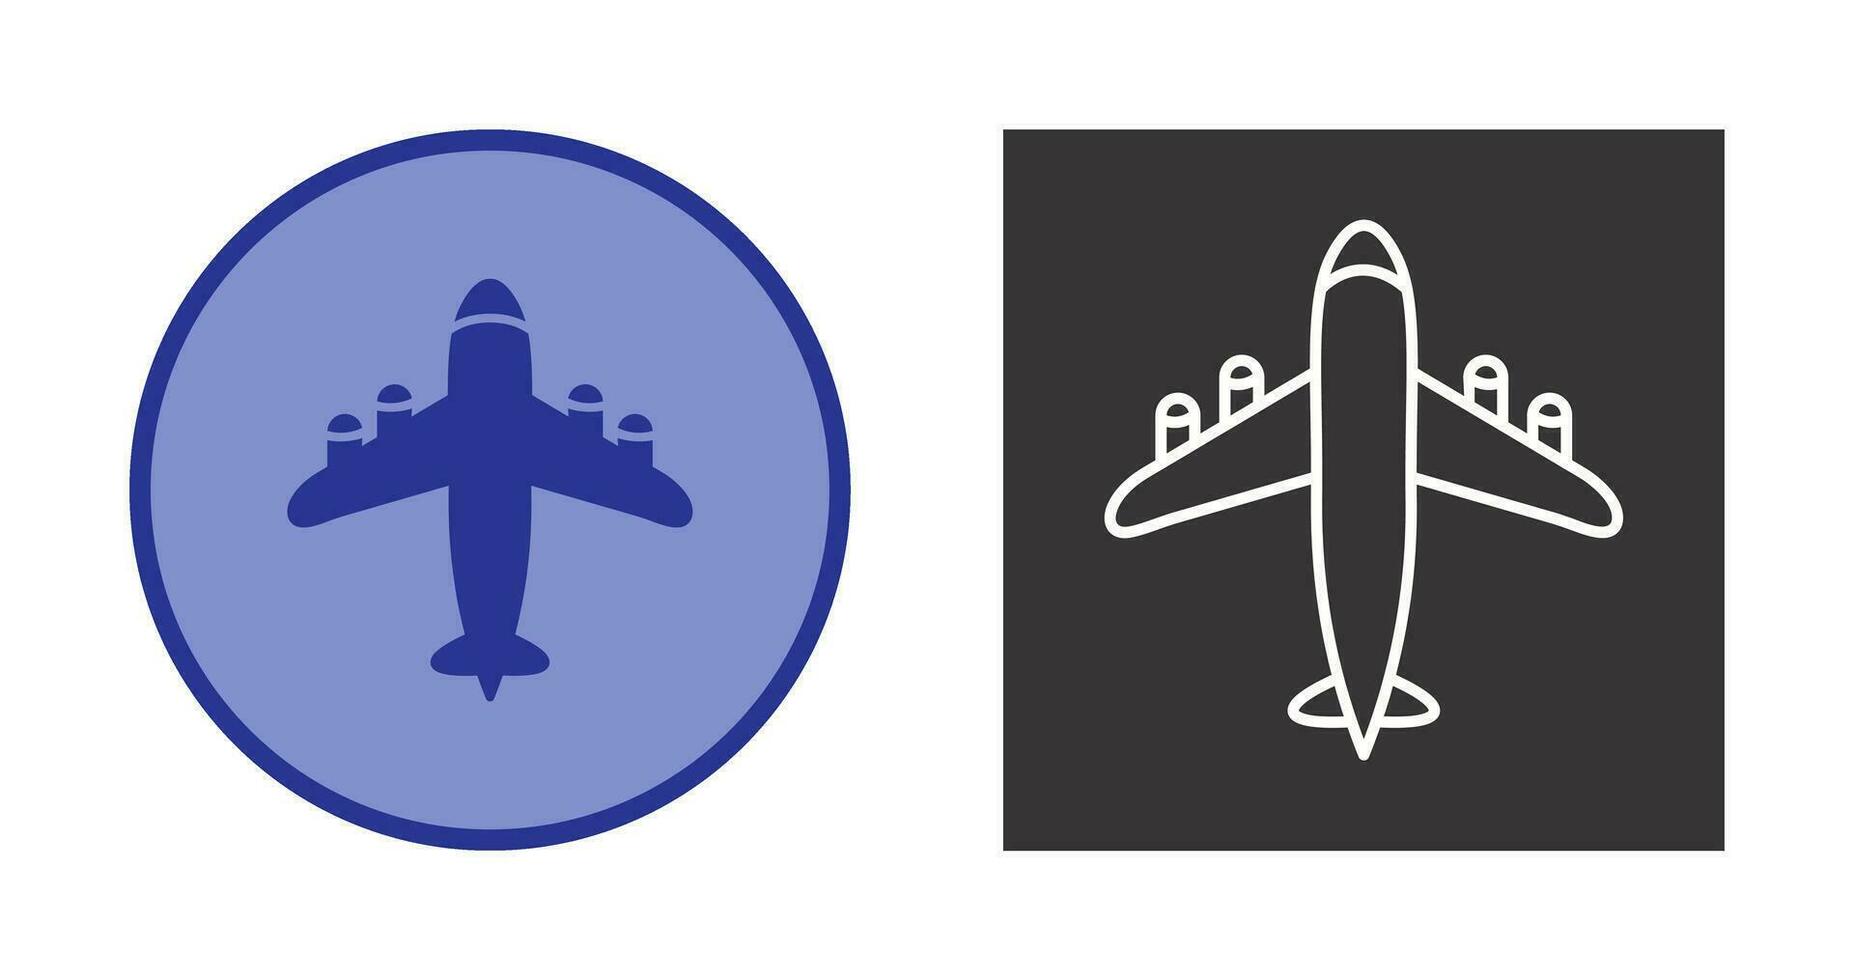 Flying Airplane Vector Icon